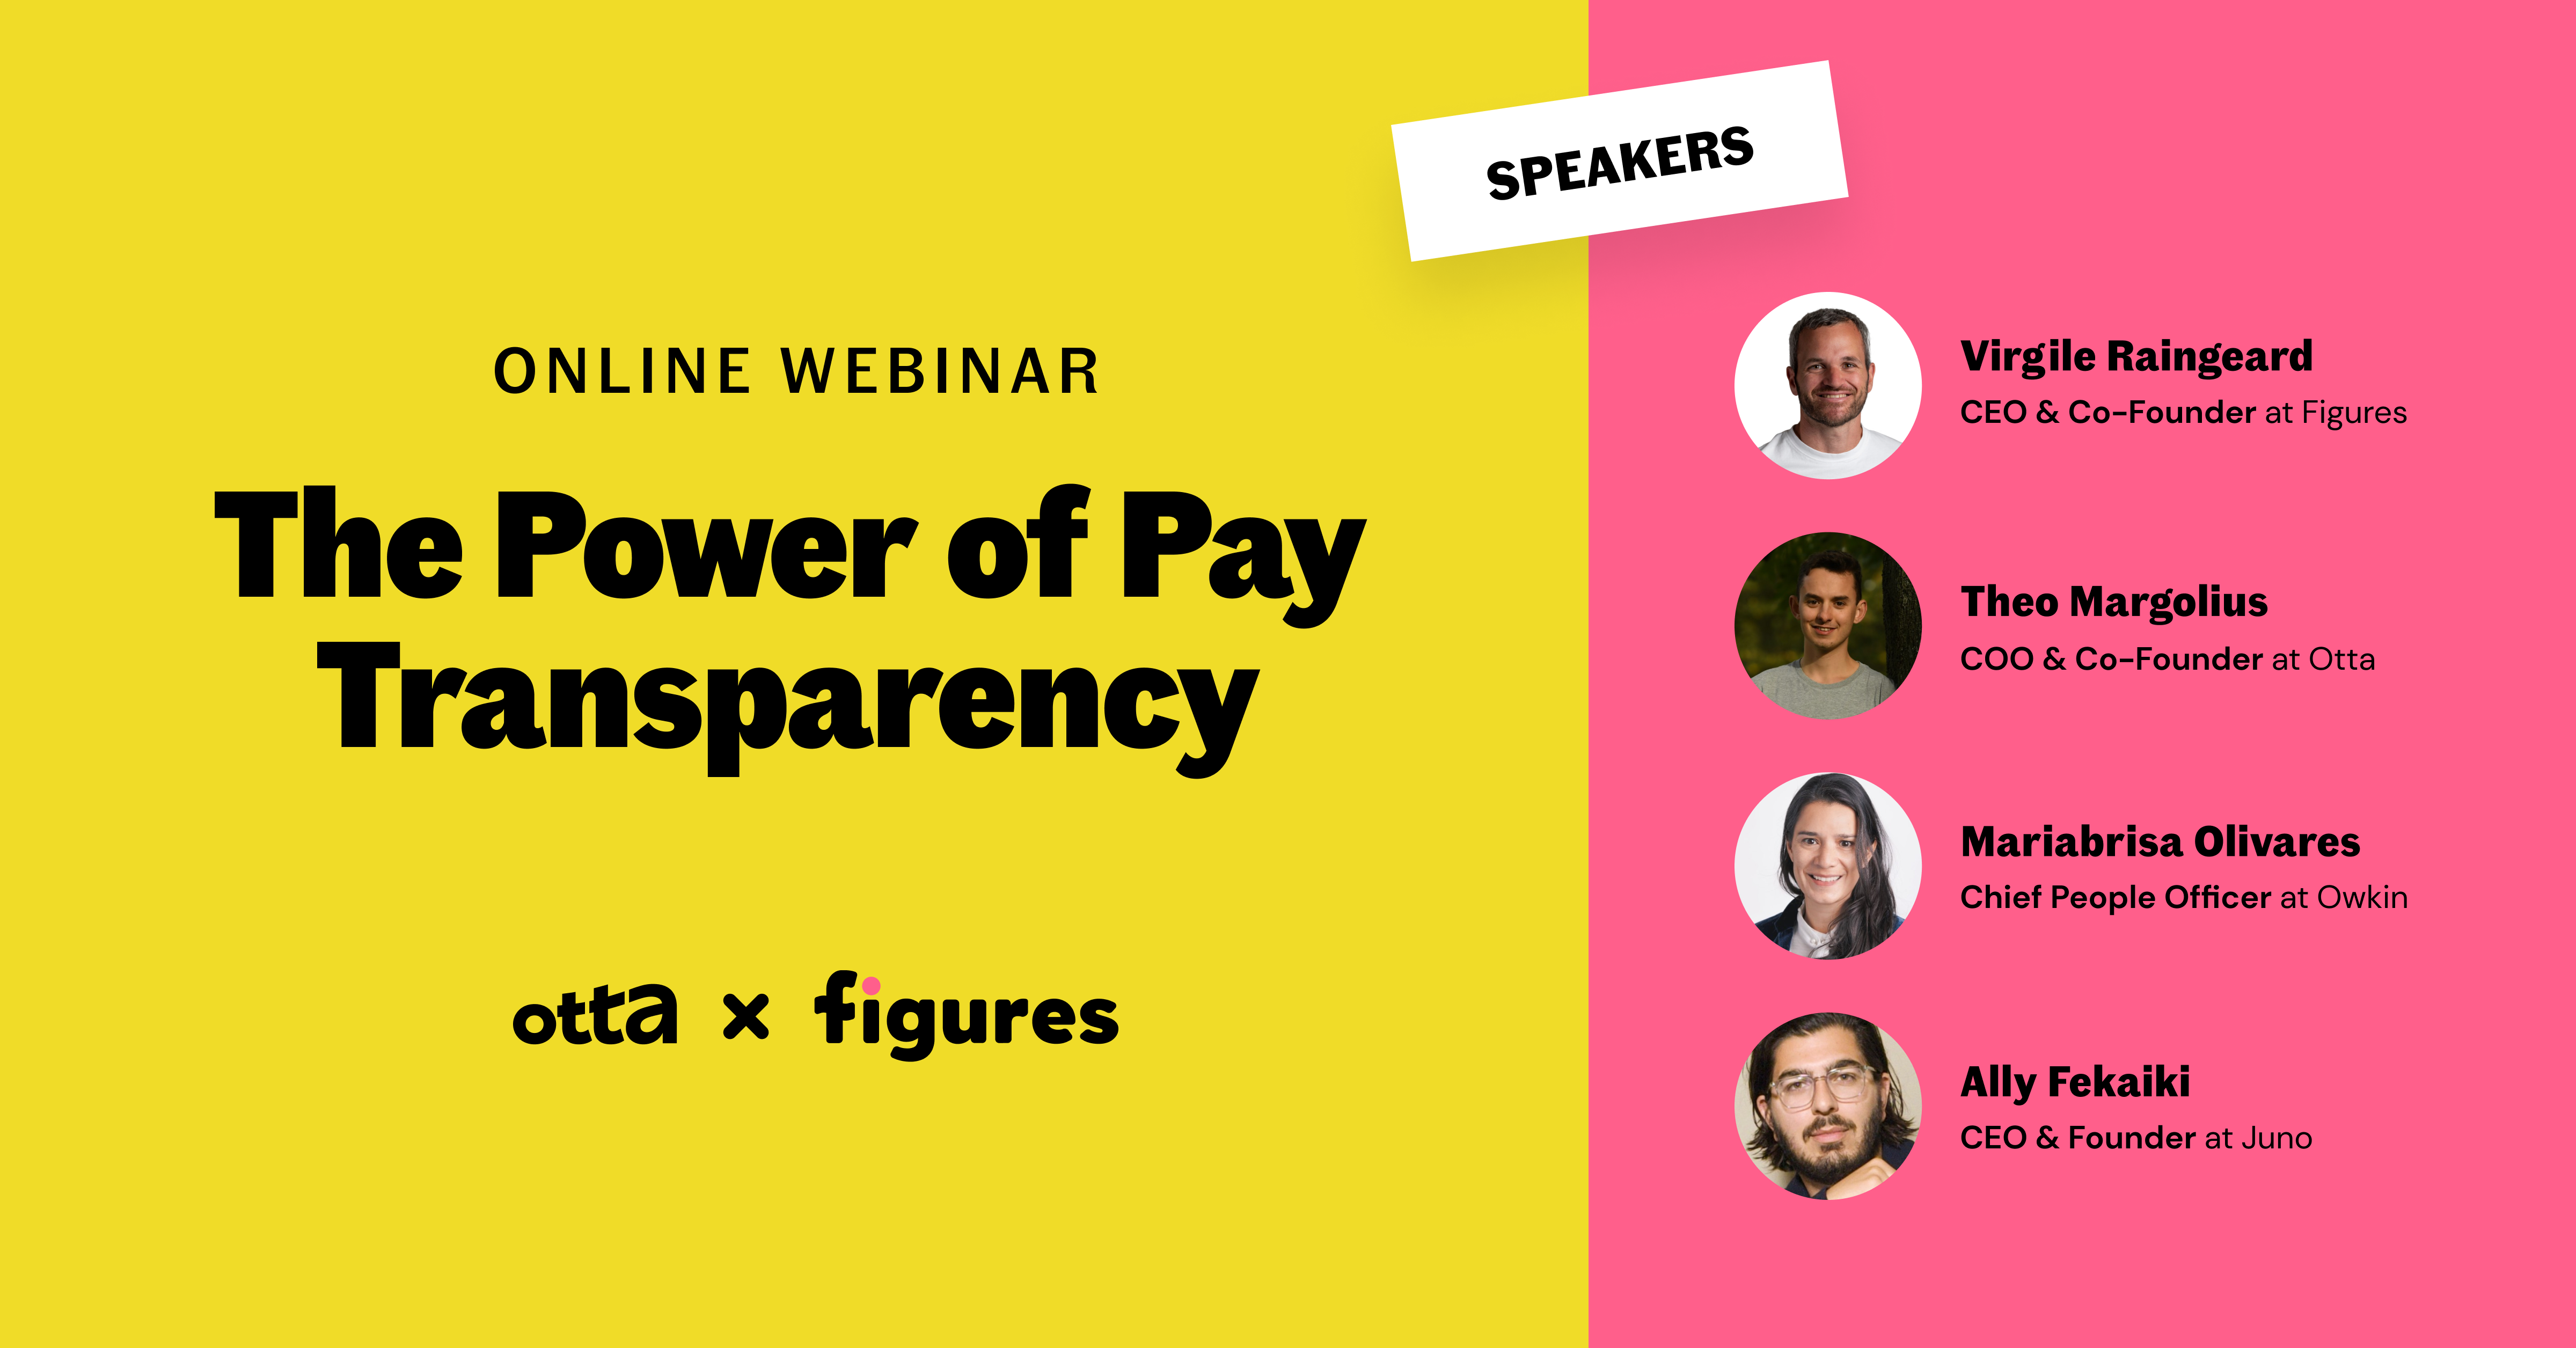 The Power of Pay Transparency